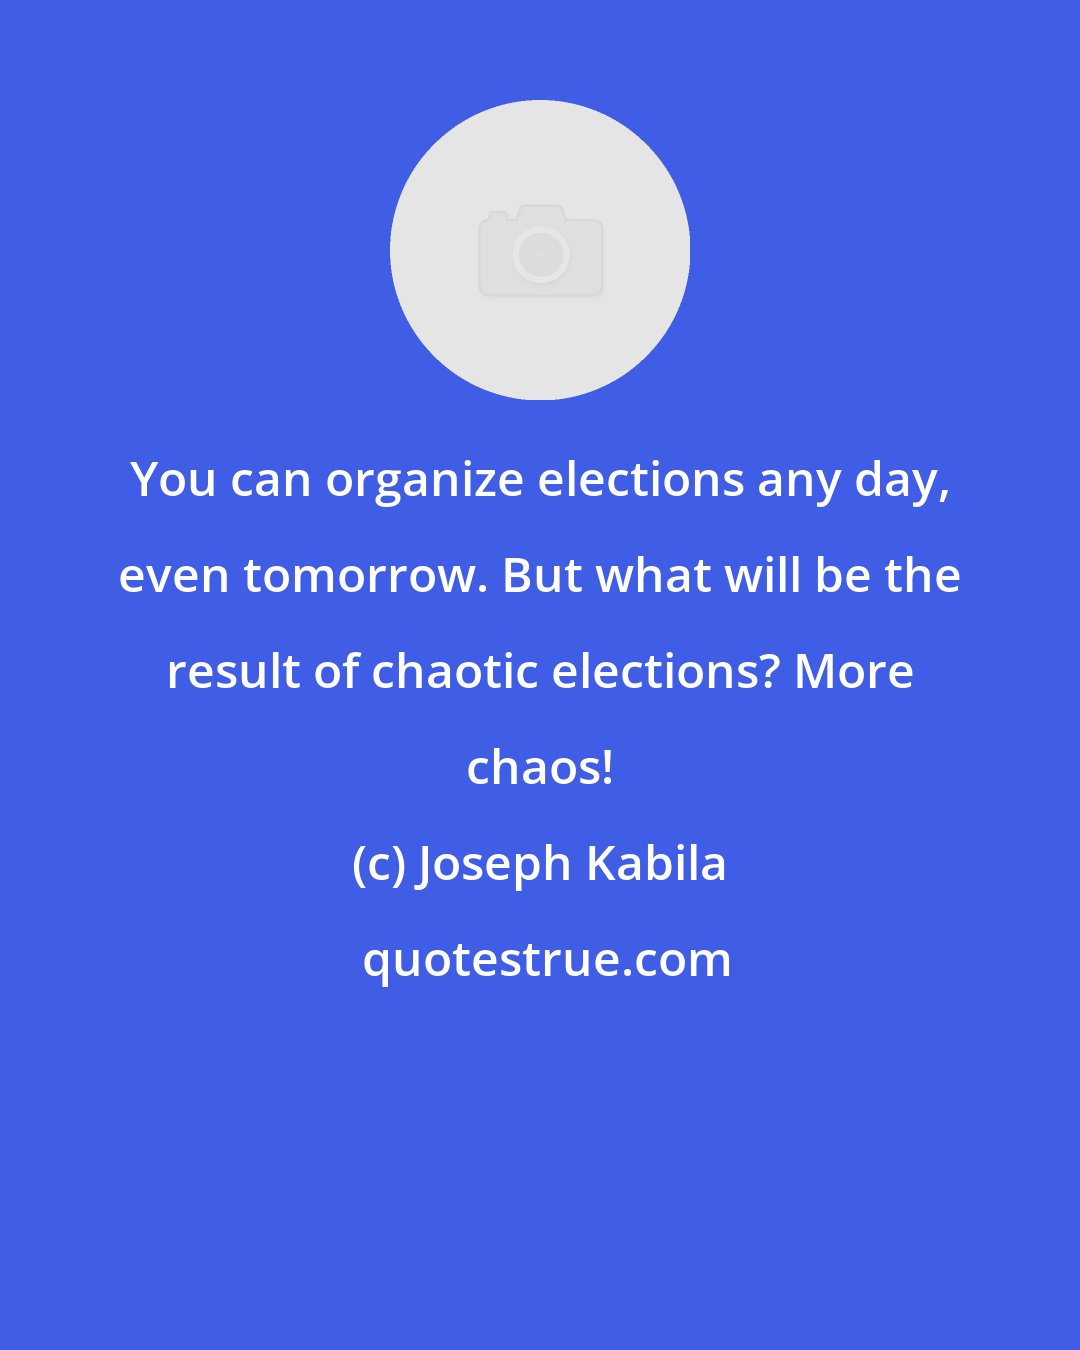 Joseph Kabila: You can organize elections any day, even tomorrow. But what will be the result of chaotic elections? More chaos!